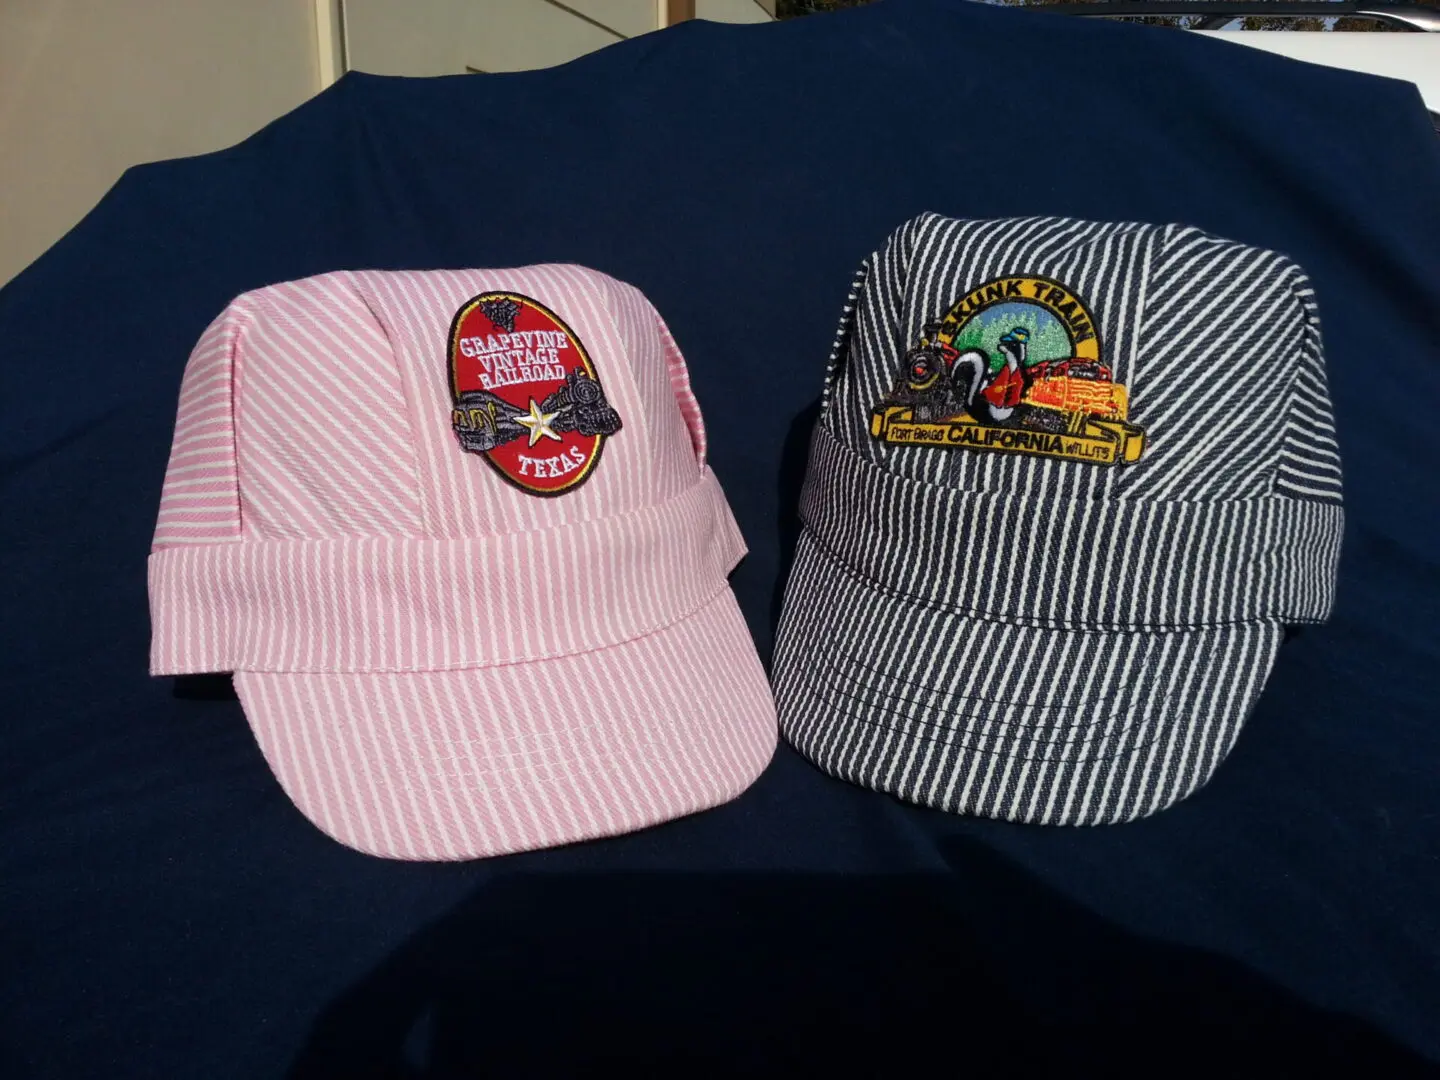 pink and black color hats on display